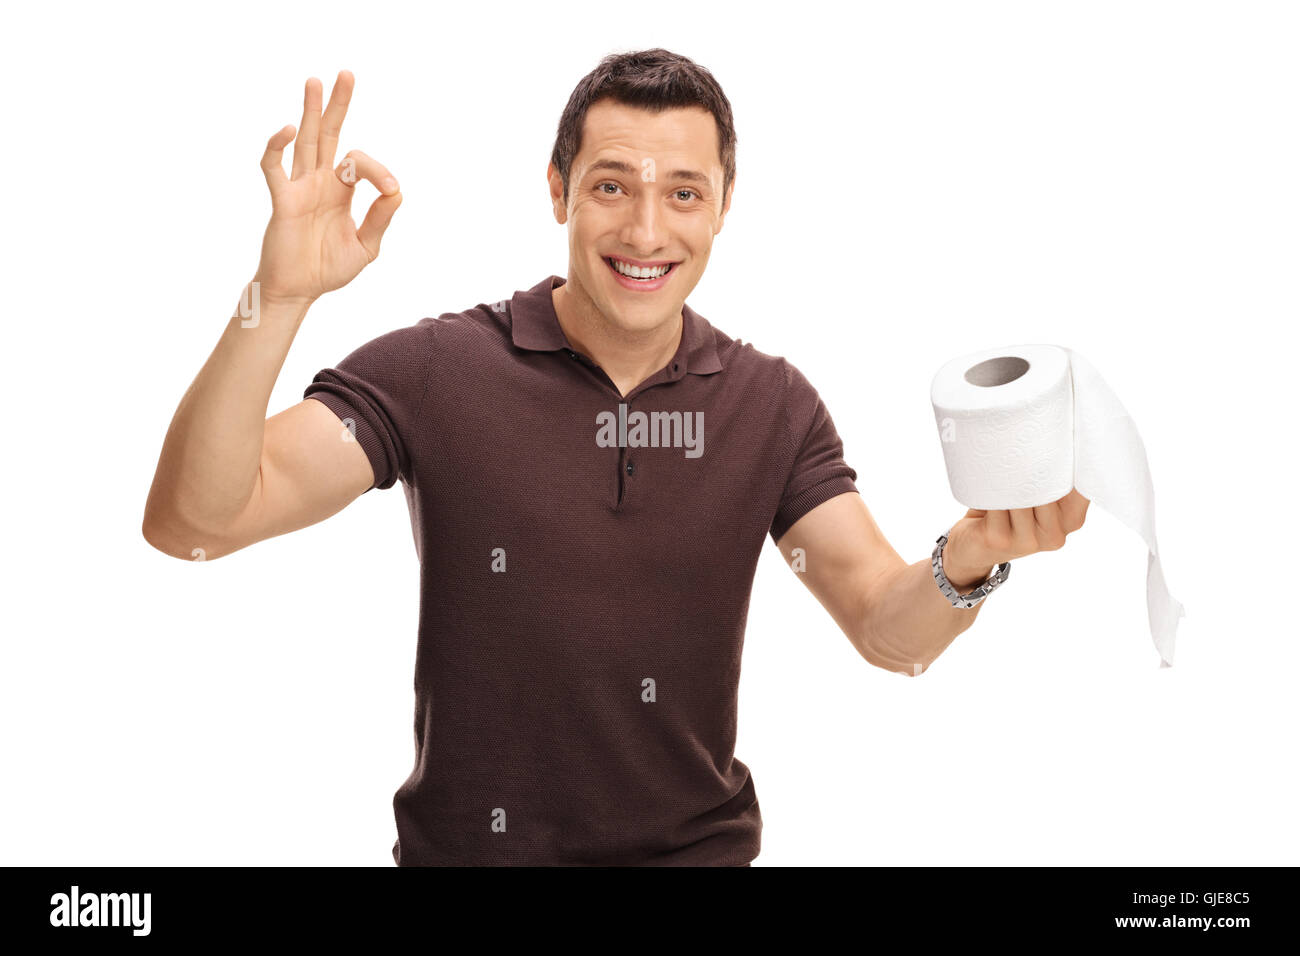 Smiling young man holding a toilet paper roll in one hand and making an ok gesture with his other isolated on white background Stock Photo